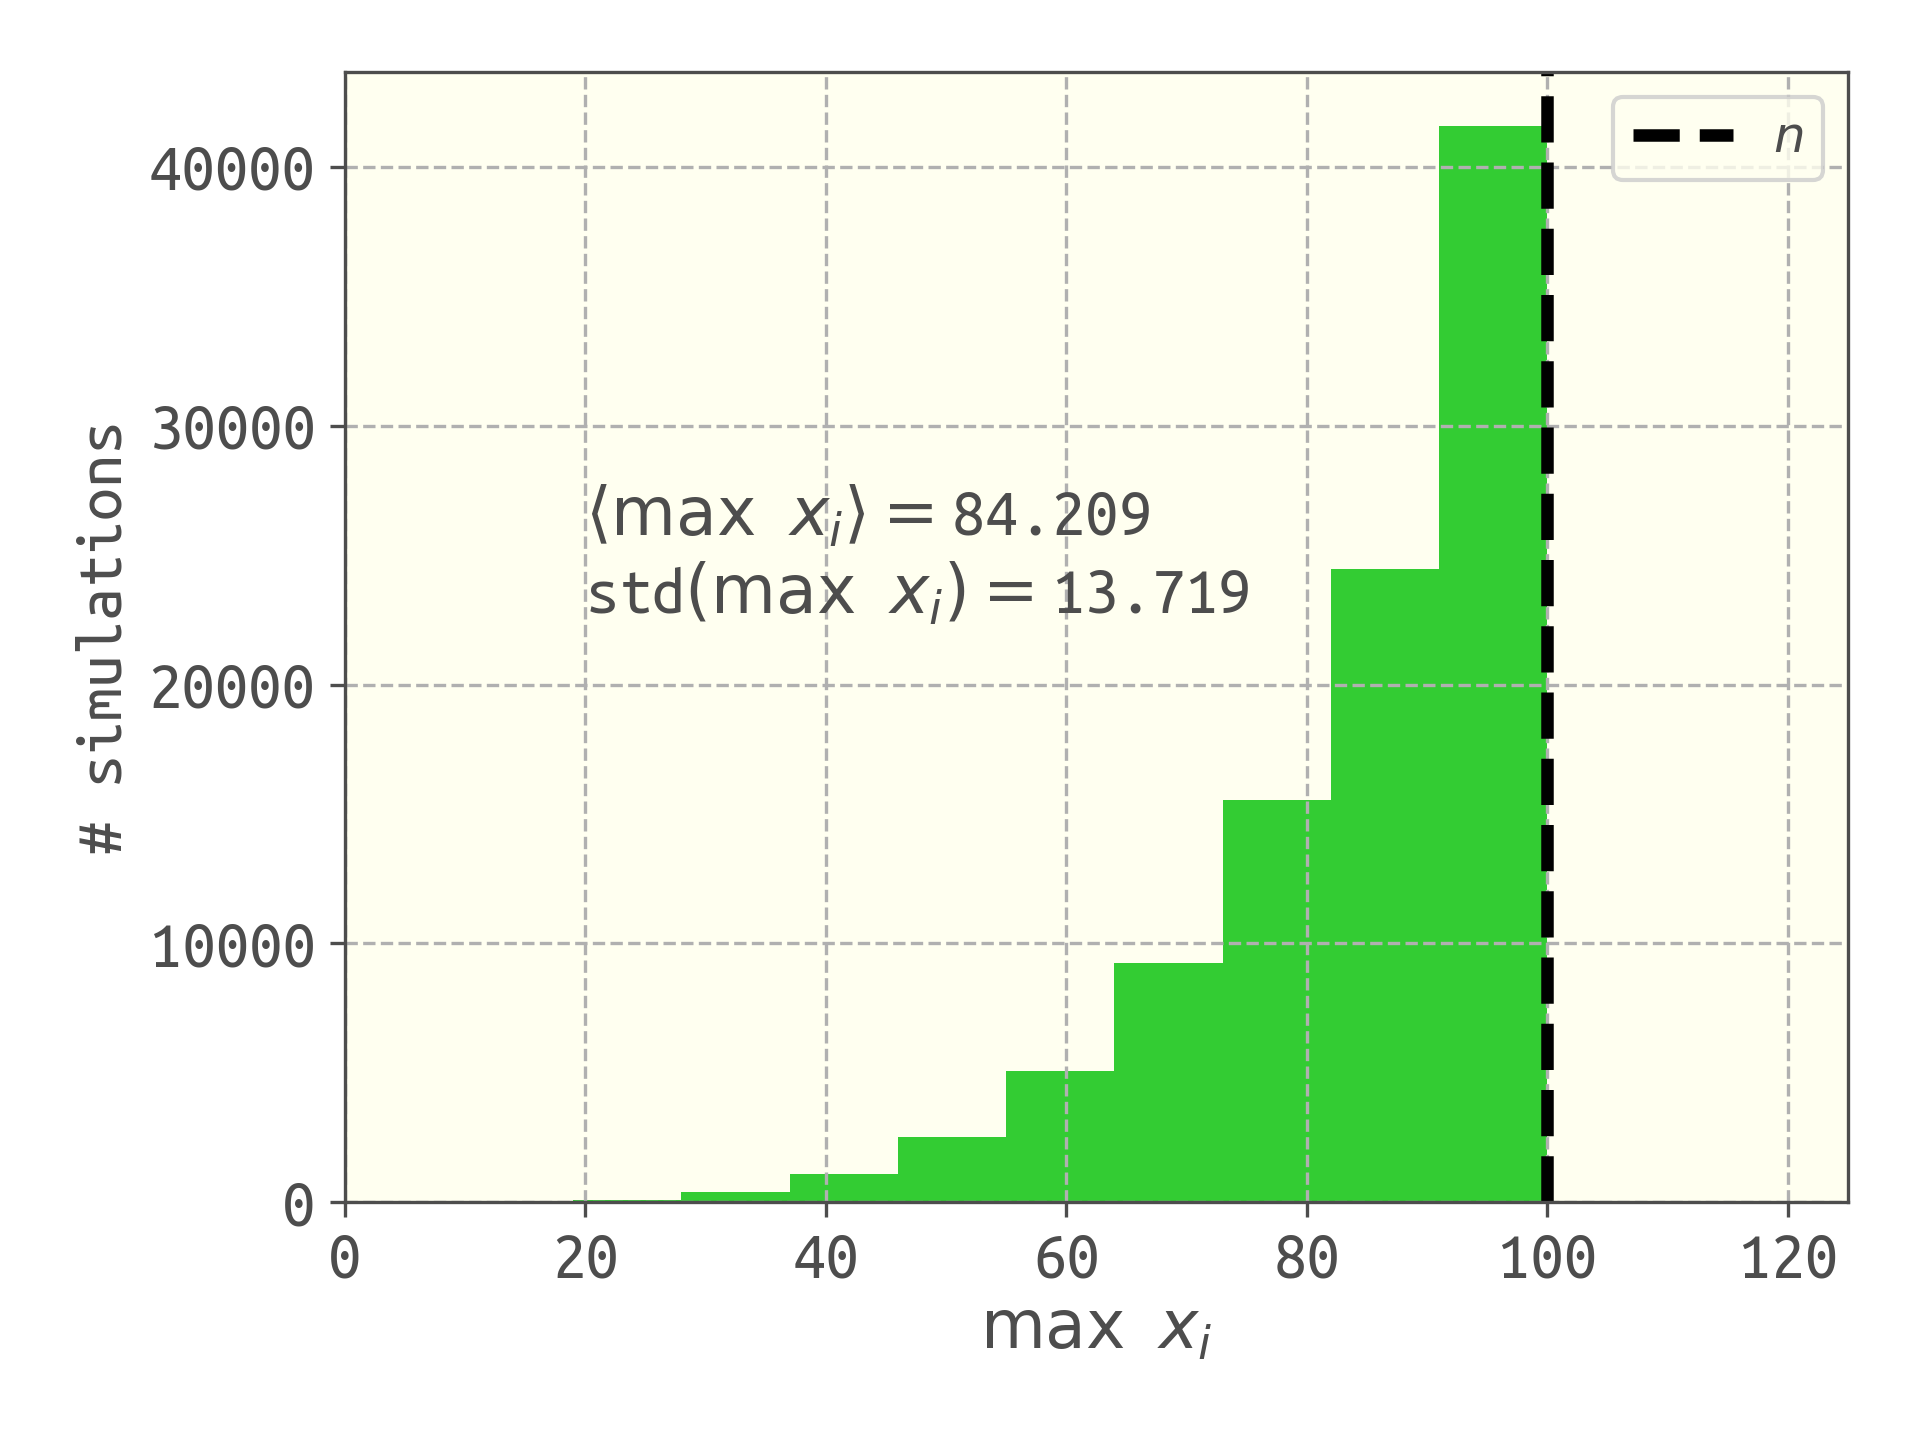 The maximum serial number observed is a biased estimator of $n$; the average of the estimate over 10,000 simulations is less than the true number of tanks, $n$.